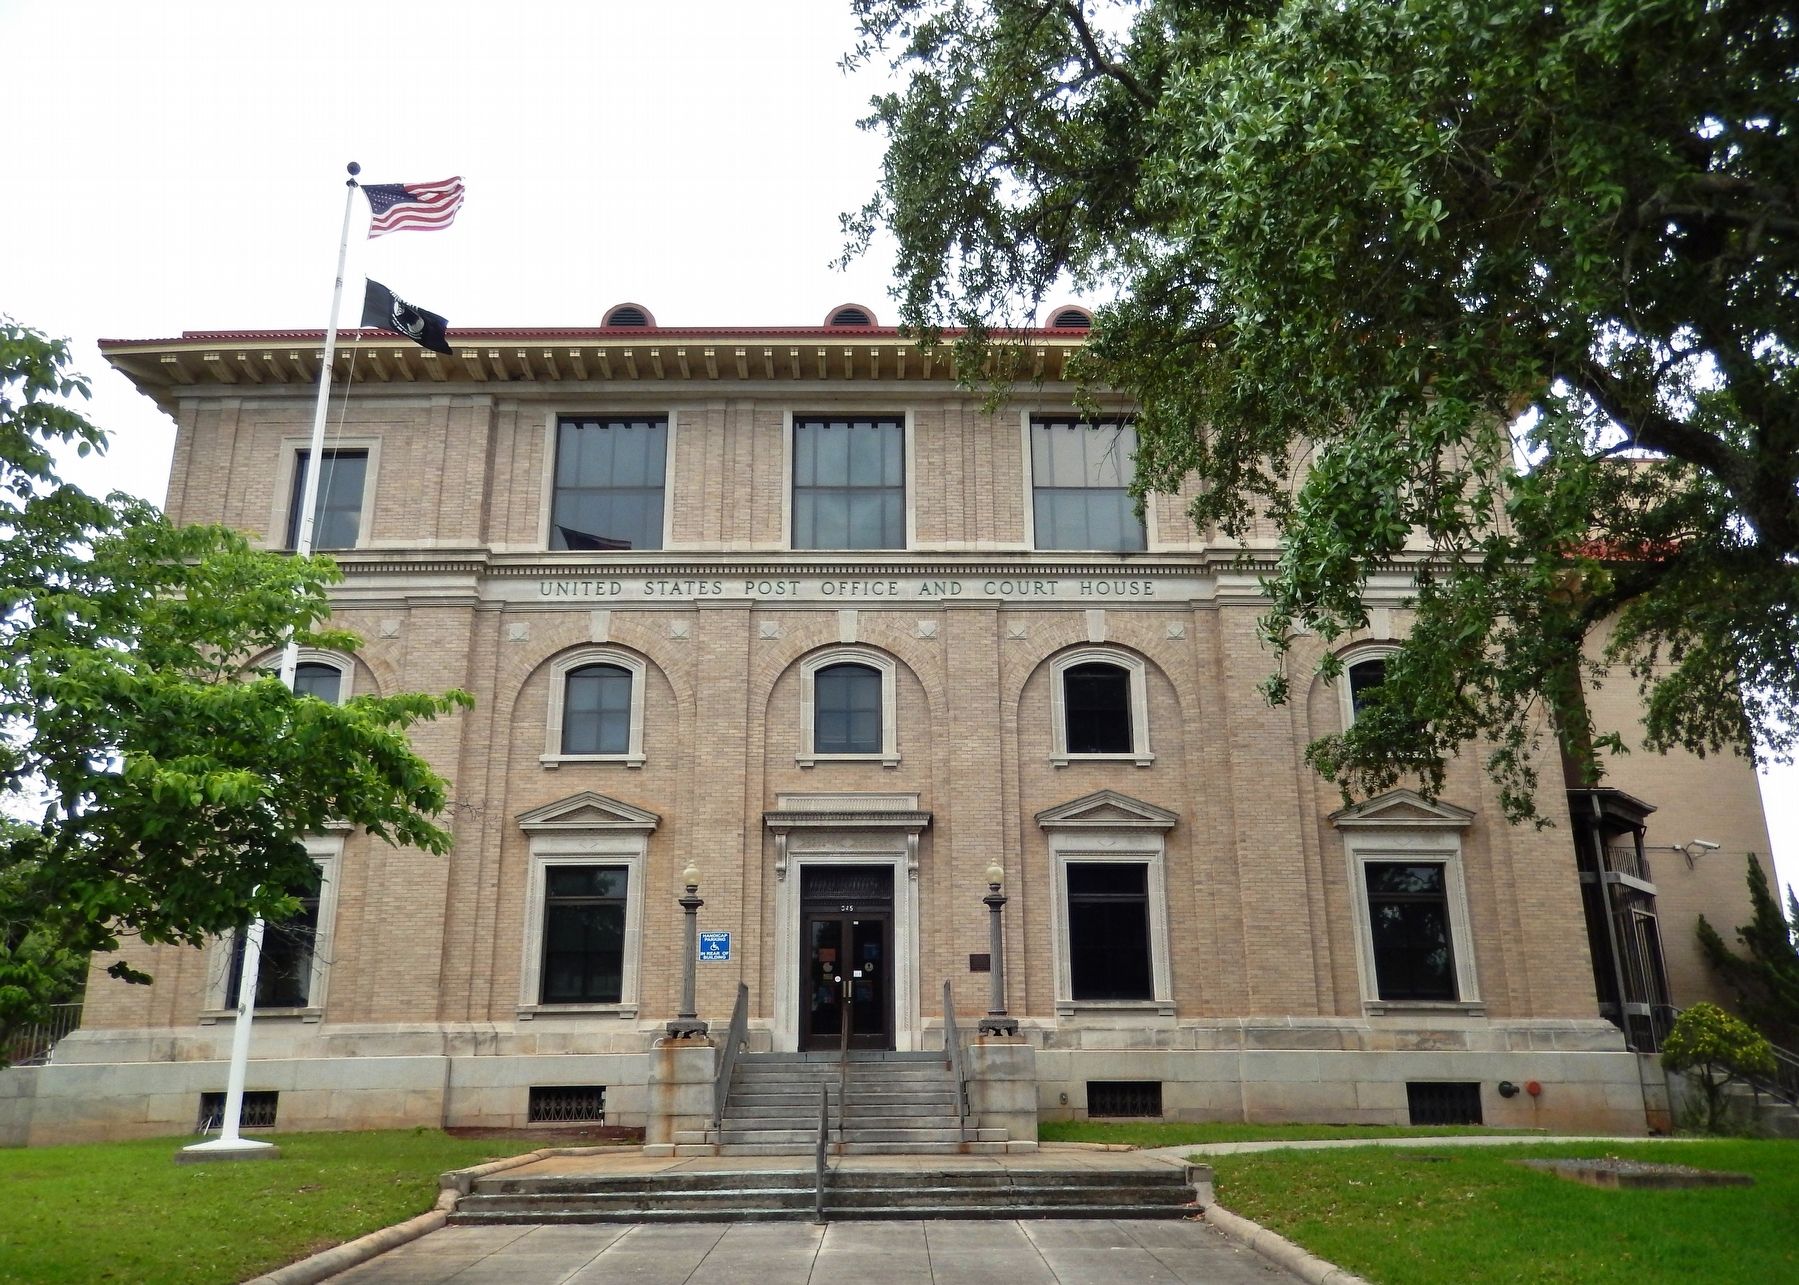 United States Post Office — Courthouse (<i>south/front elevation</i>) image. Click for full size.